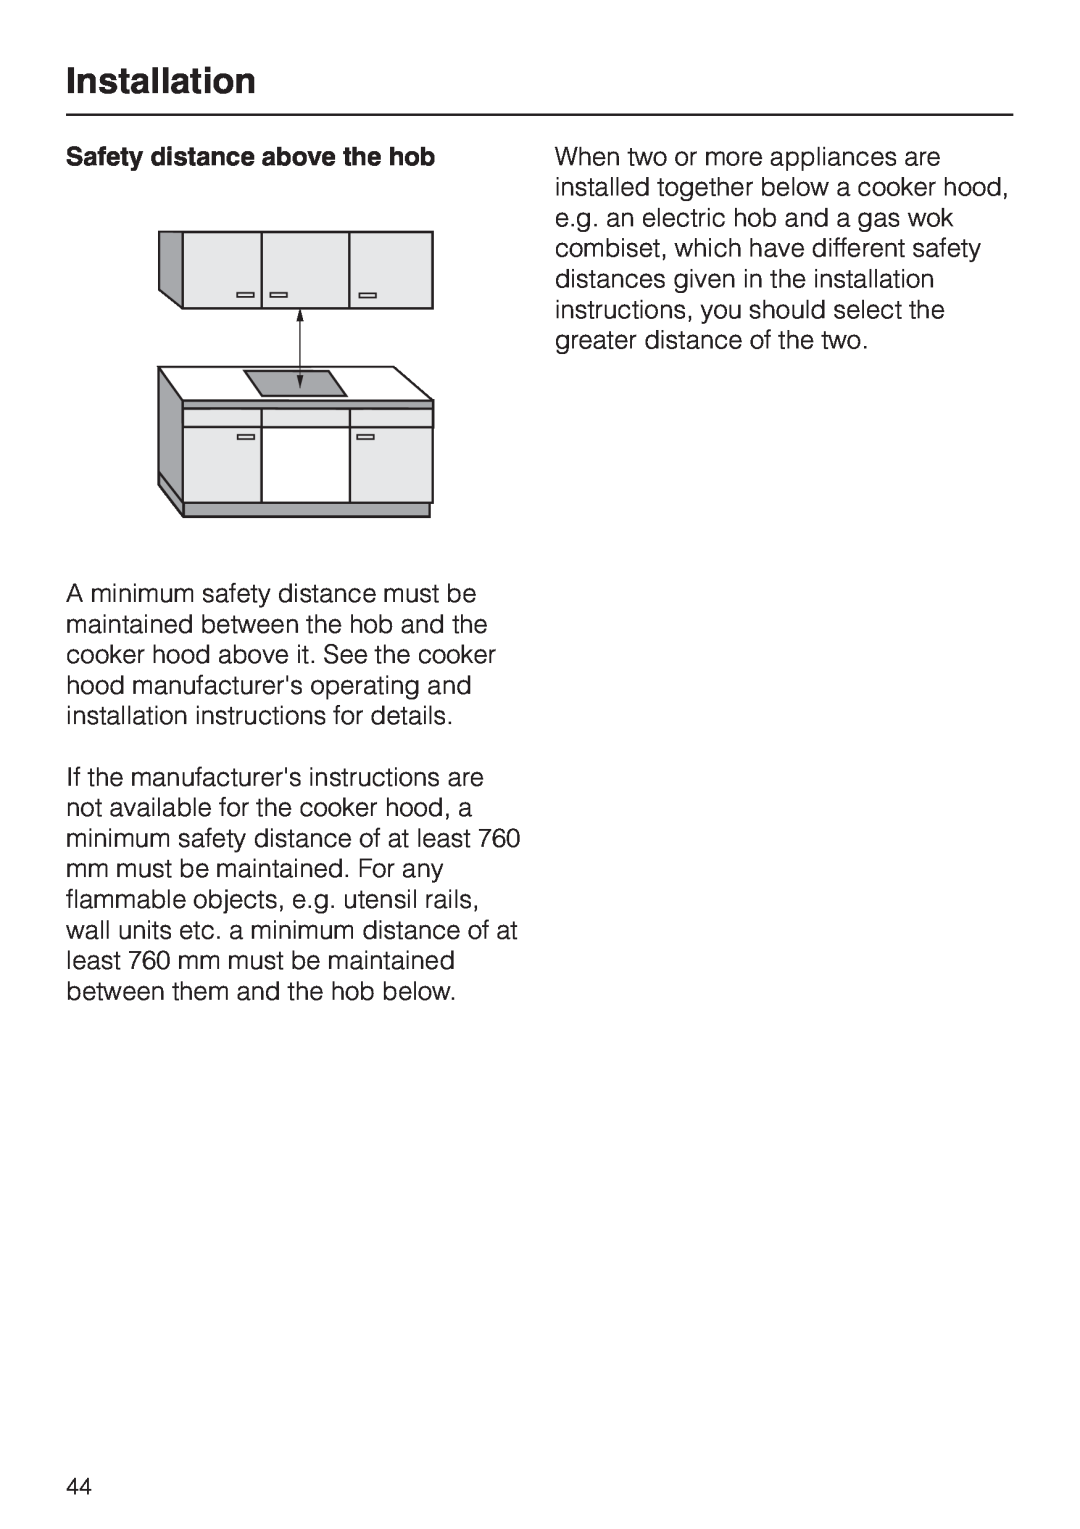 Miele KM5773 installation instructions Installation, Safety distance above the hob 